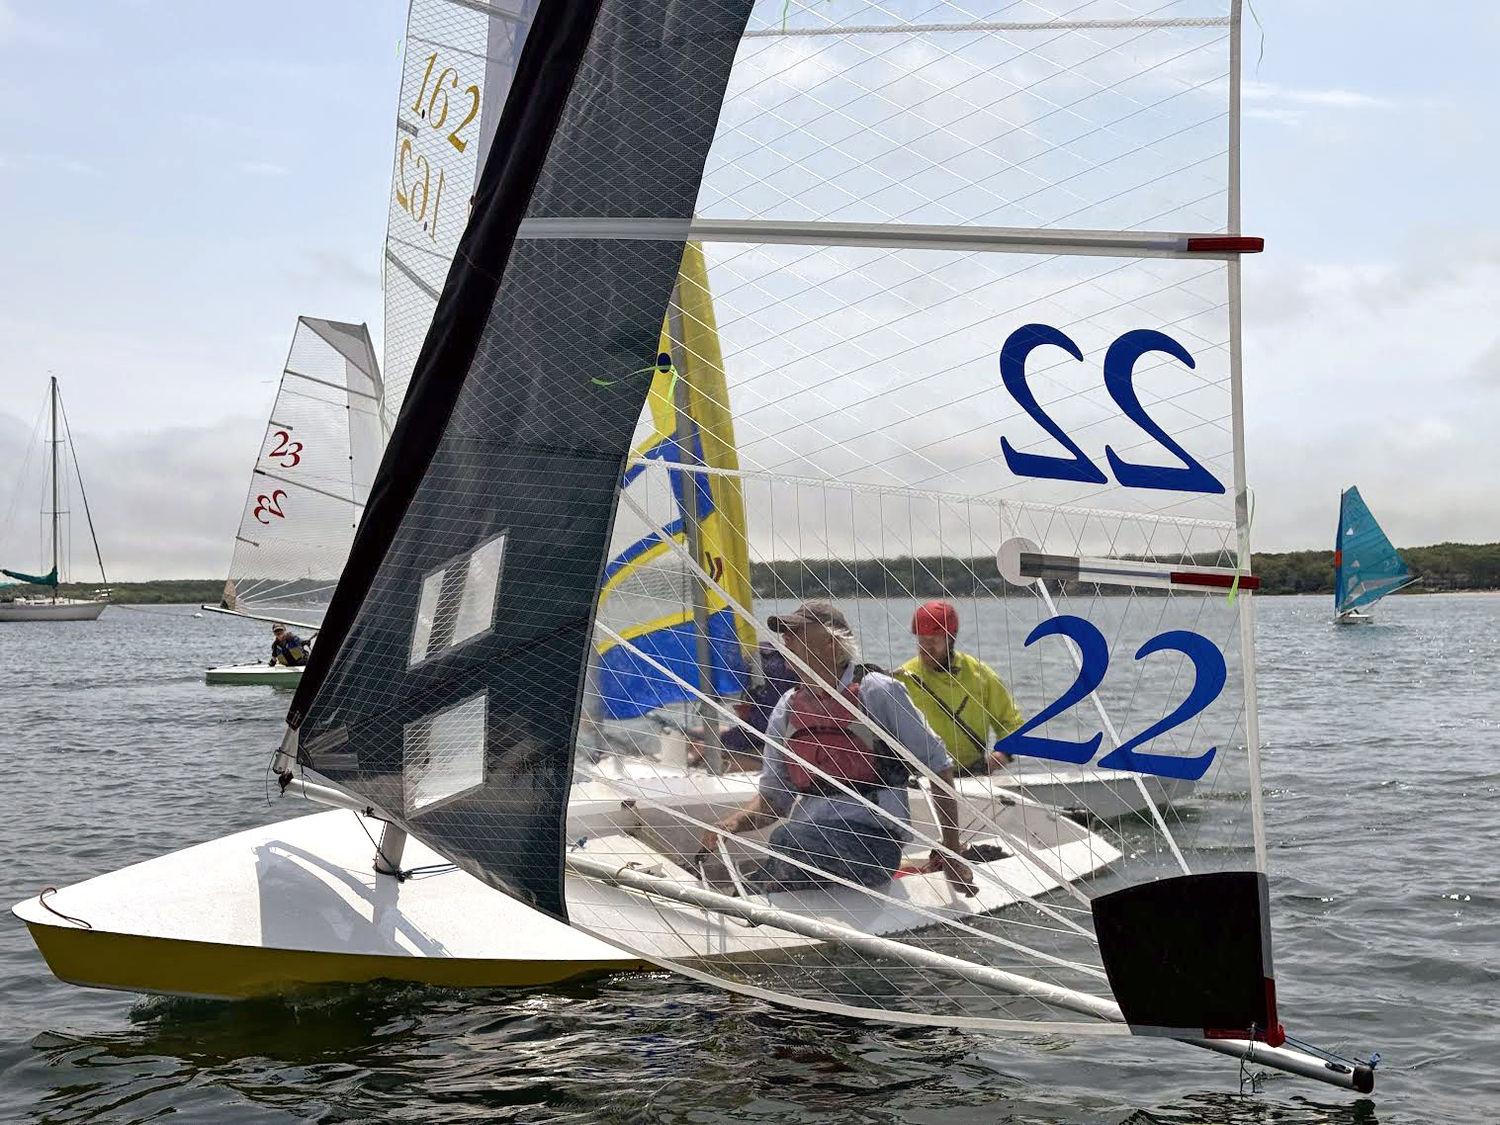 Scott Sandell, sporting a new sail he recently cut and sewed in his kitchen, slipping by his competitors’ boats moments before the first start.   MICHAEL MELLA